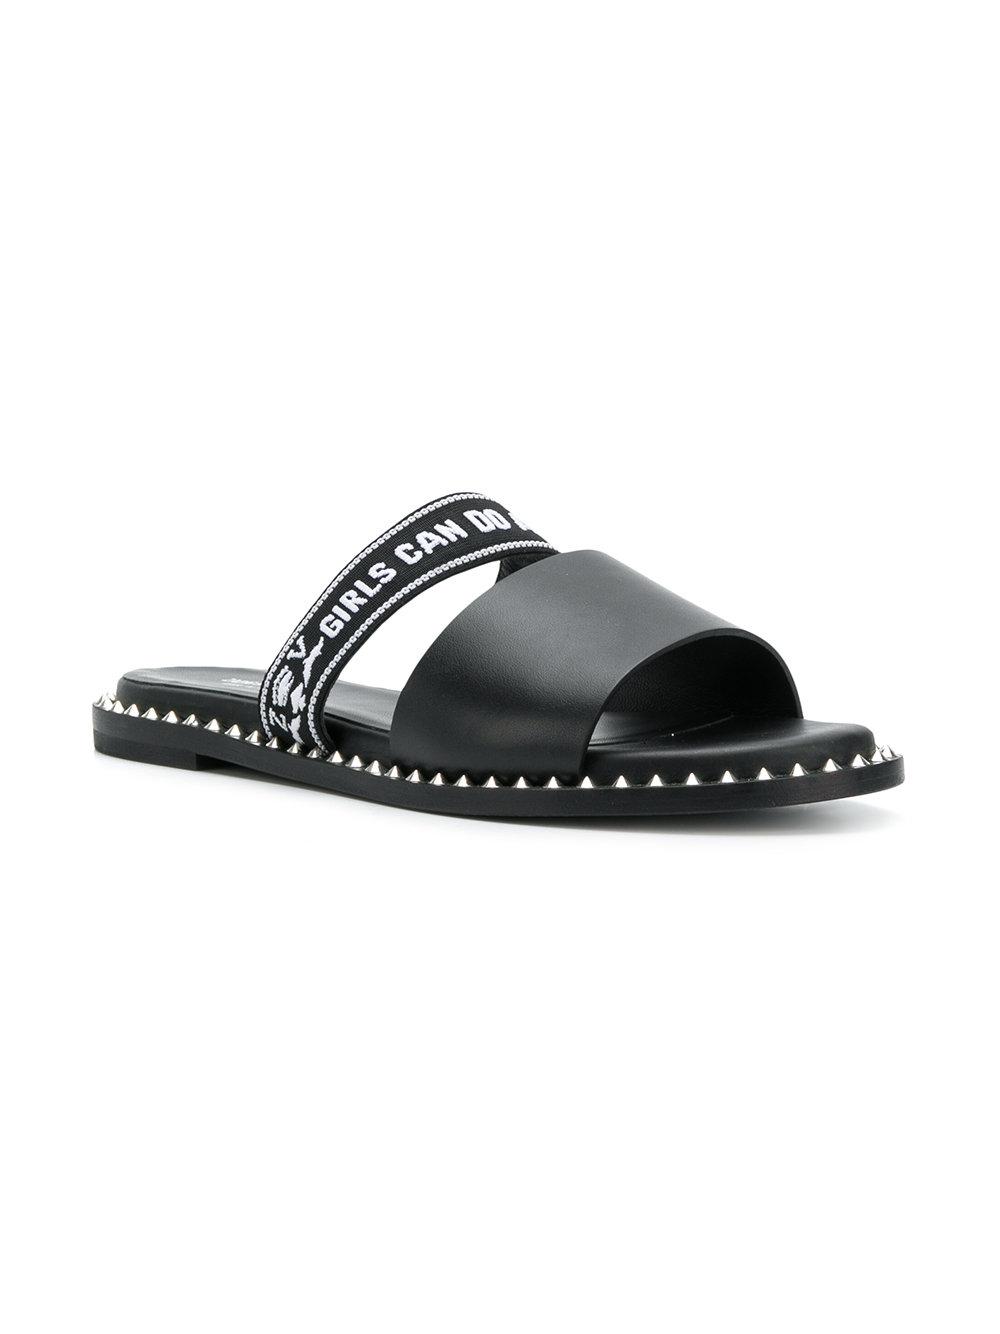 Zadig & Voltaire Leather Field Words Sandals in Black - Lyst